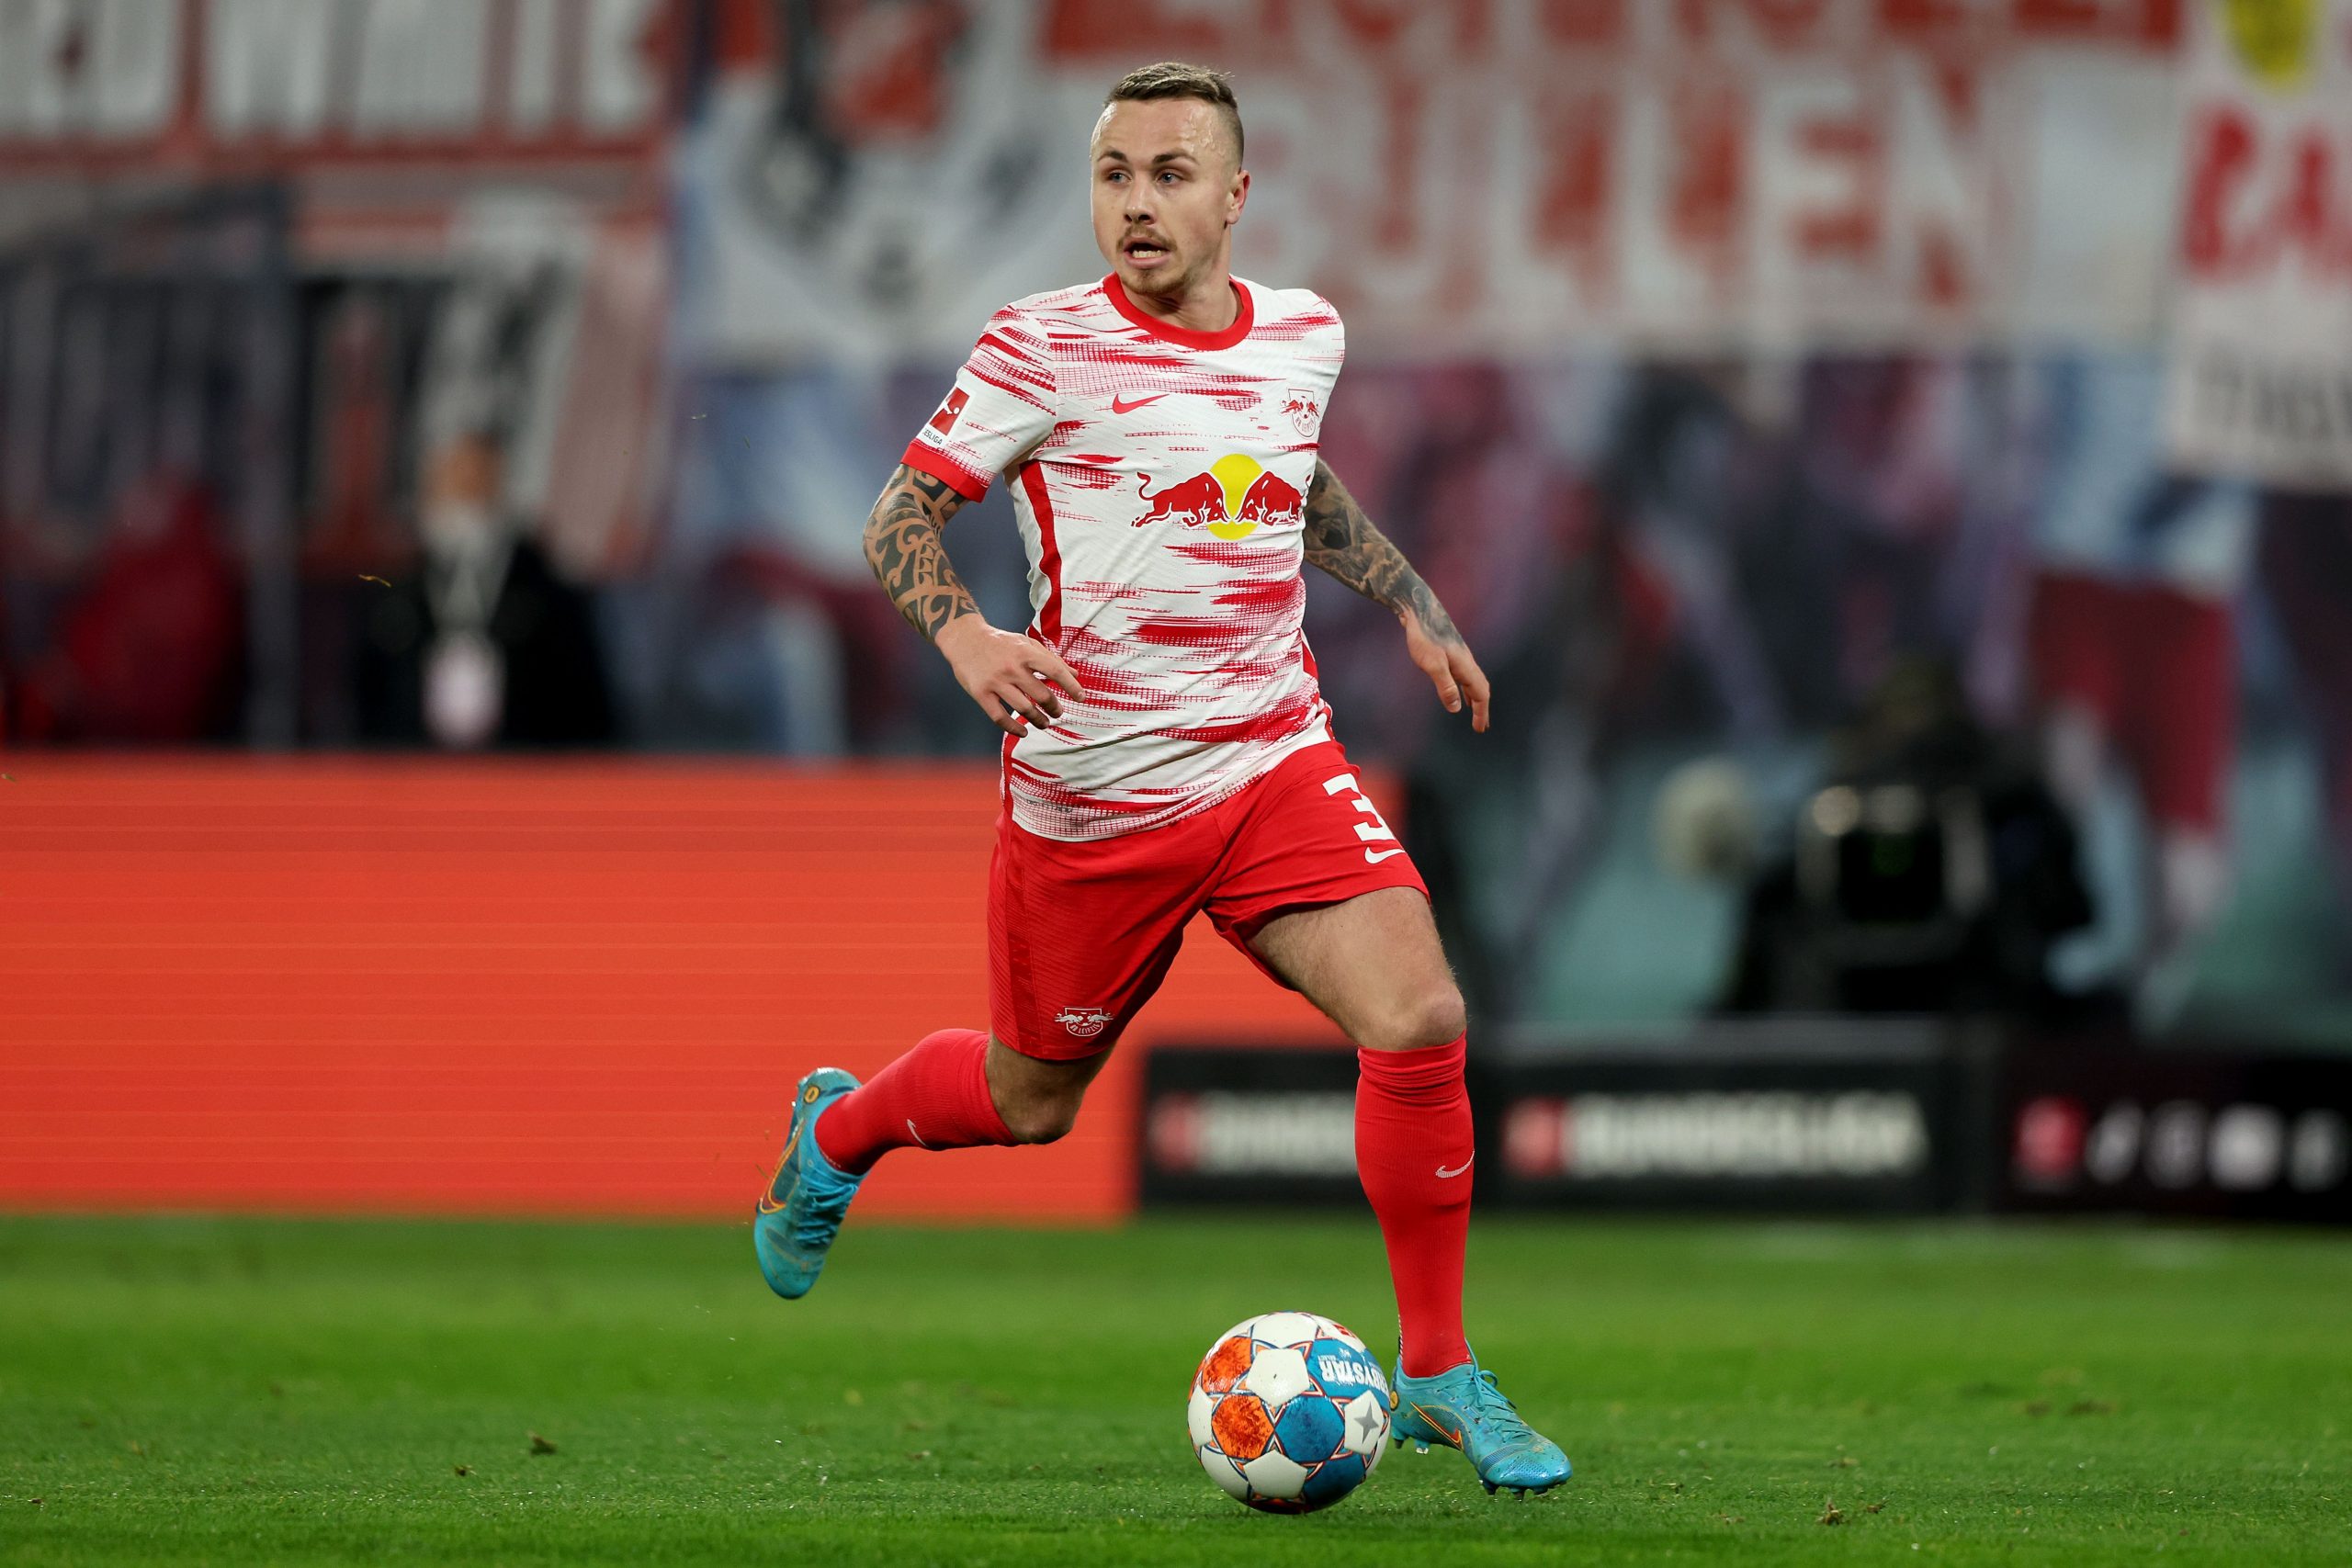 Jose Angelino of Leipzig runs with the ball for RB Leipzig. (Photo by Alexander Hassenstein/Getty Images)